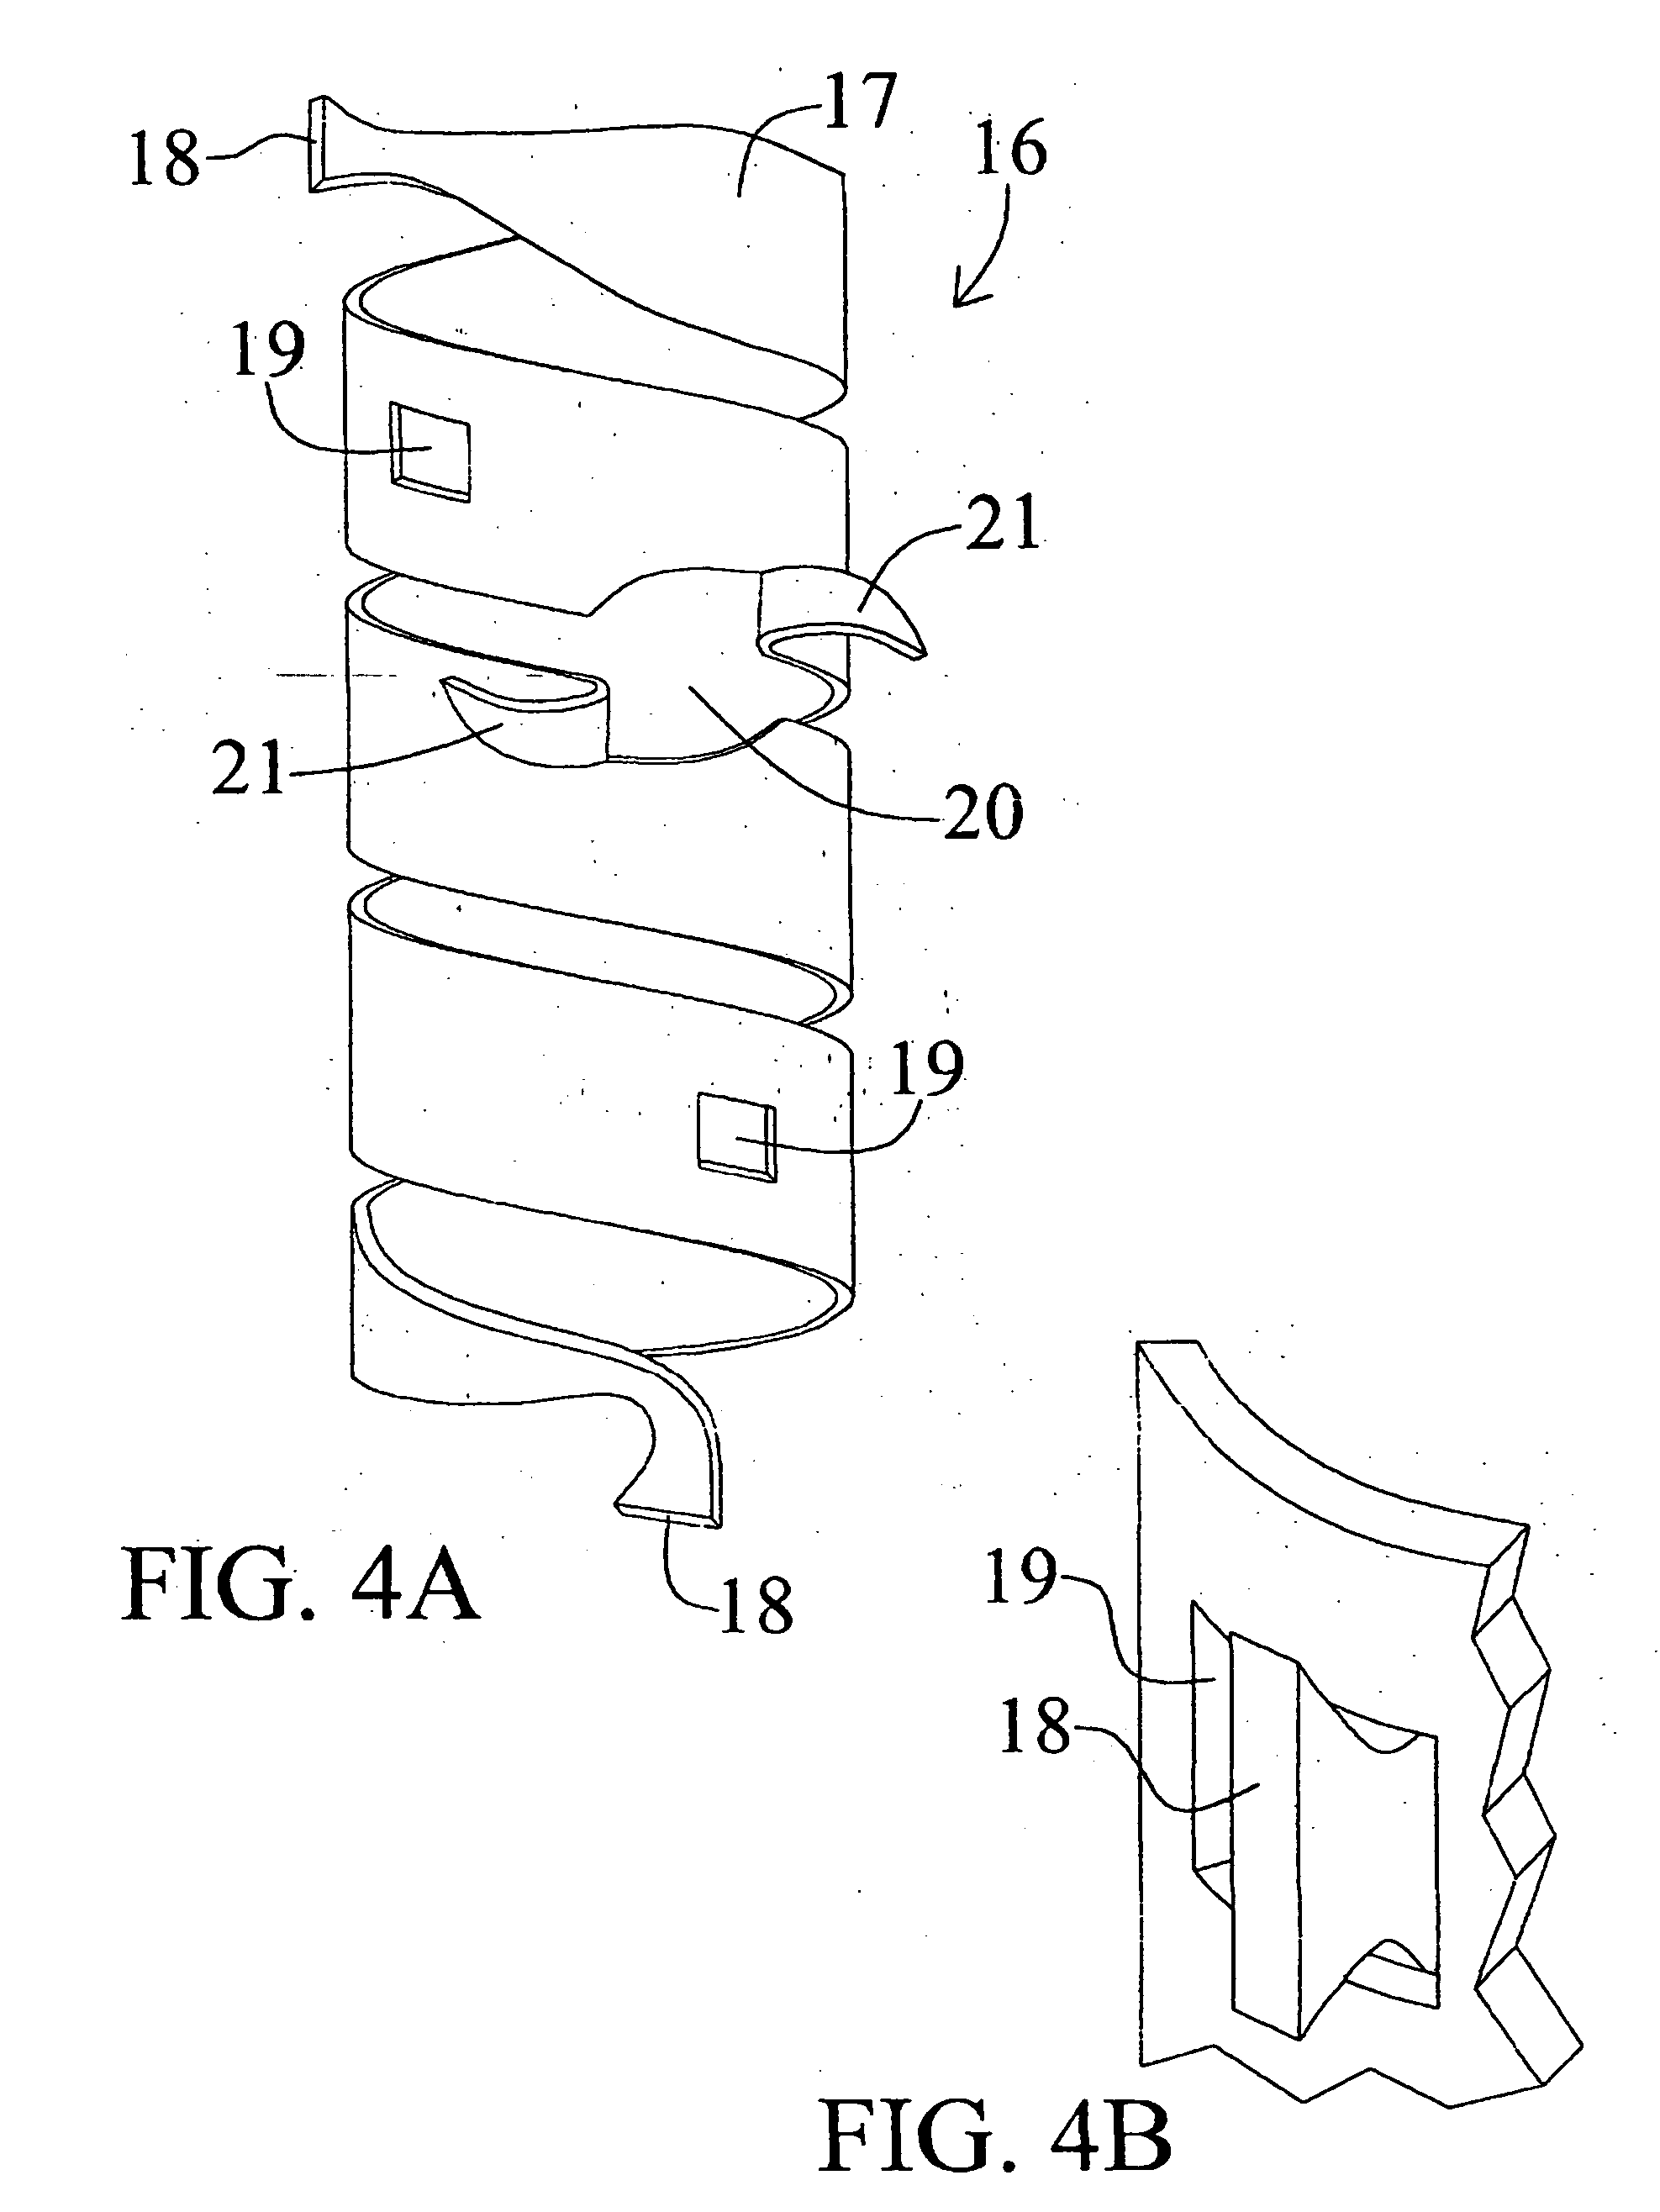 Medical implants and methods for regulating the tissue response to vascular closure devices